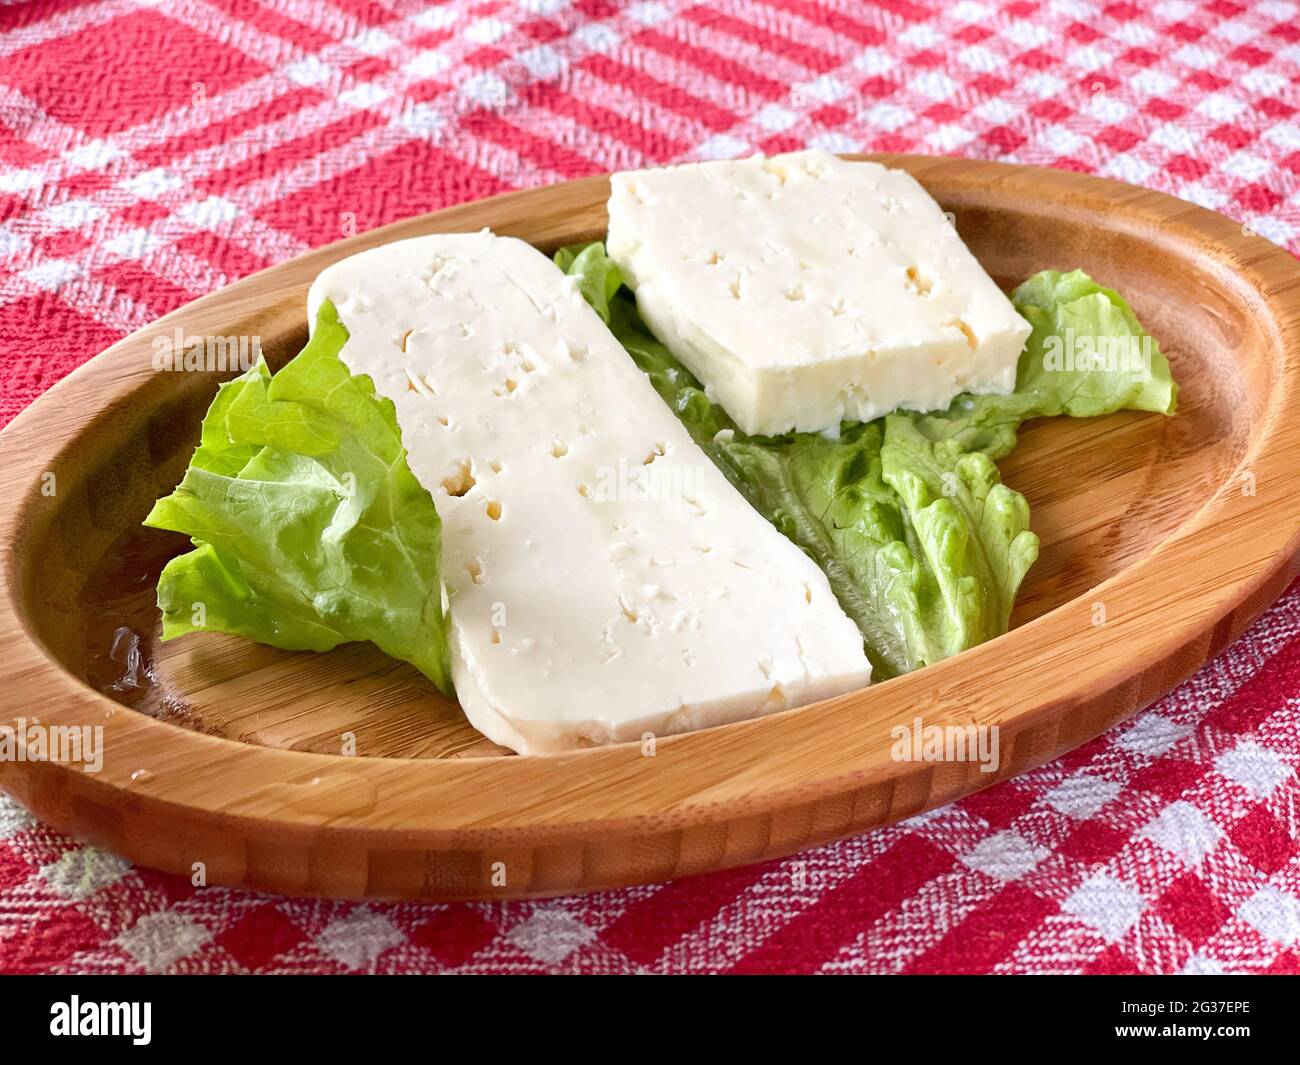 White cheese on a wooden plate. Food ang drinks.  Stock Photo